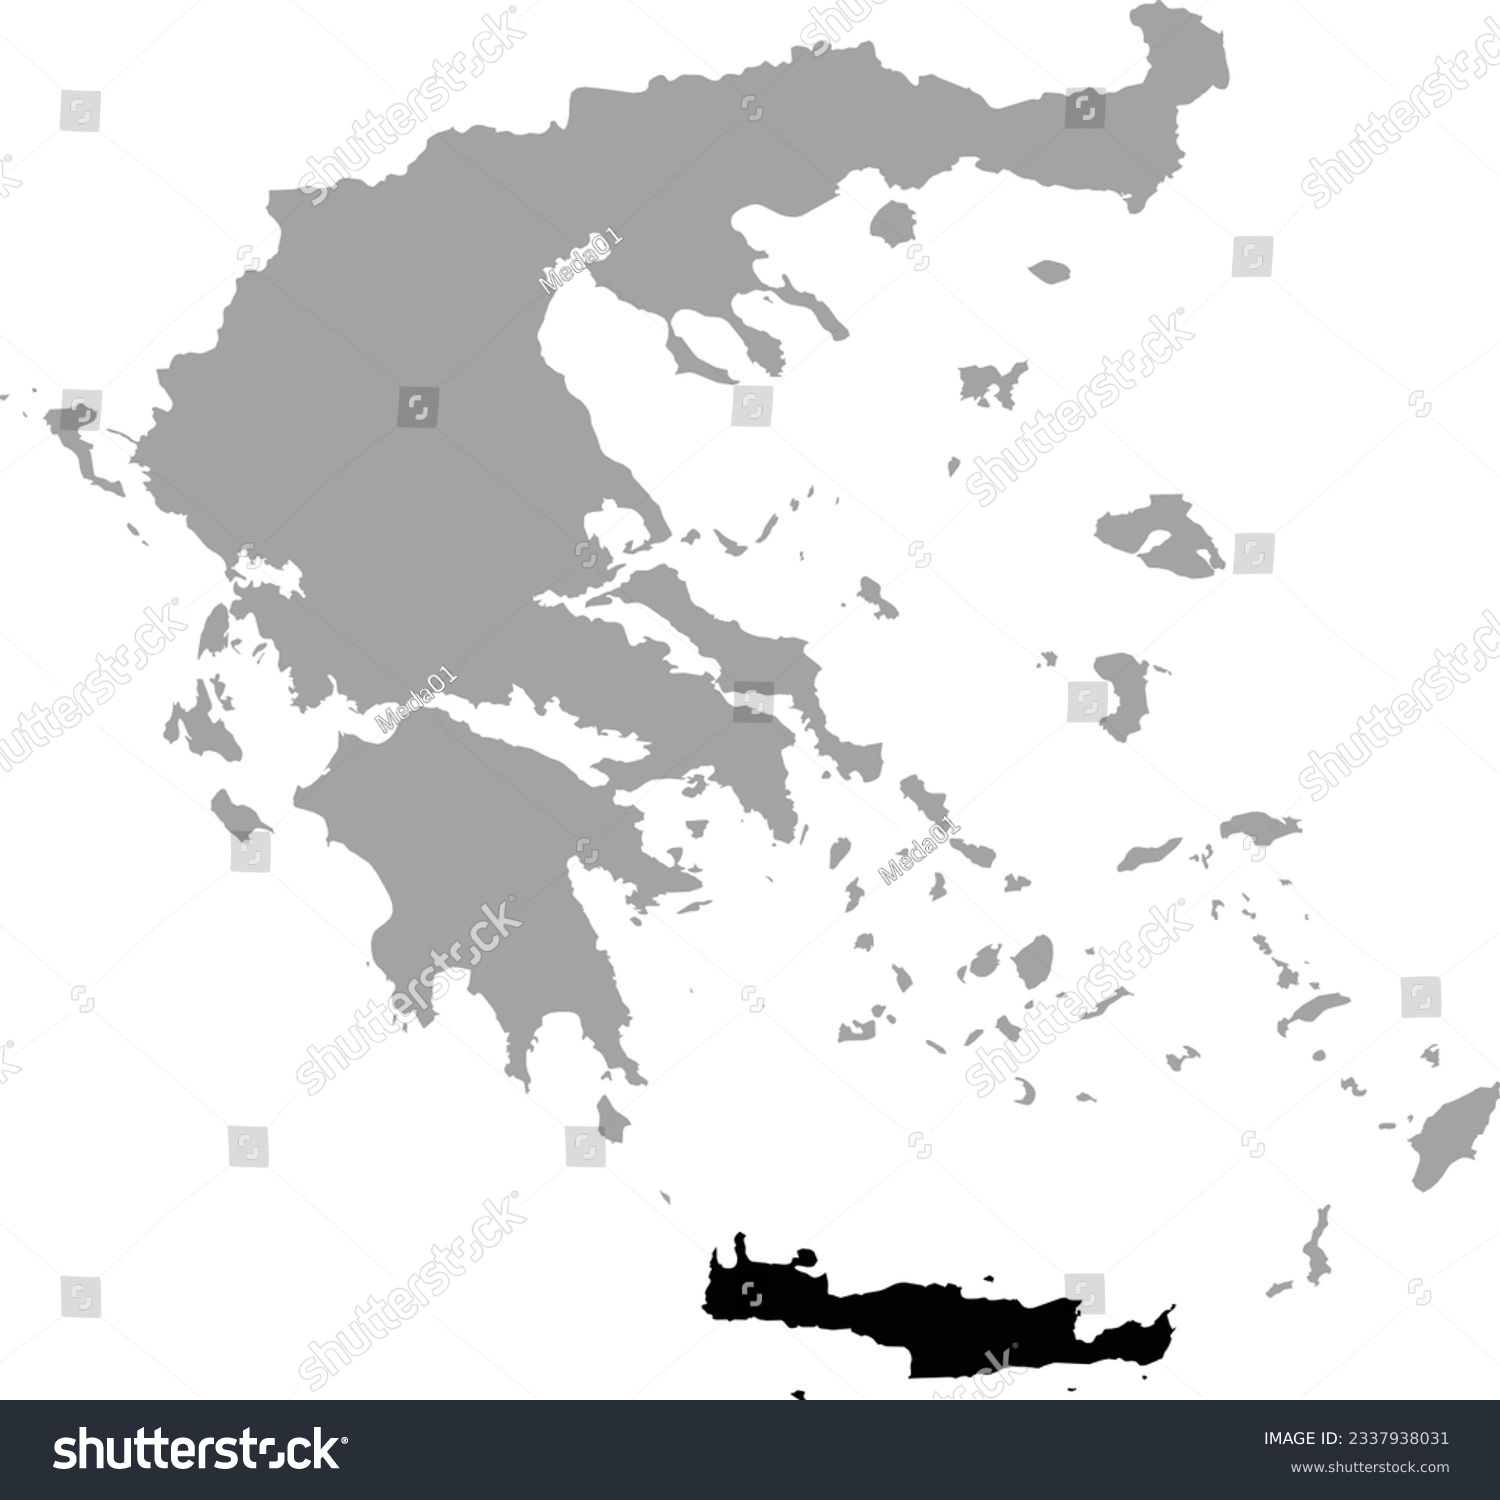 SVG of Black map of Crete Island within the gray map of Greece svg